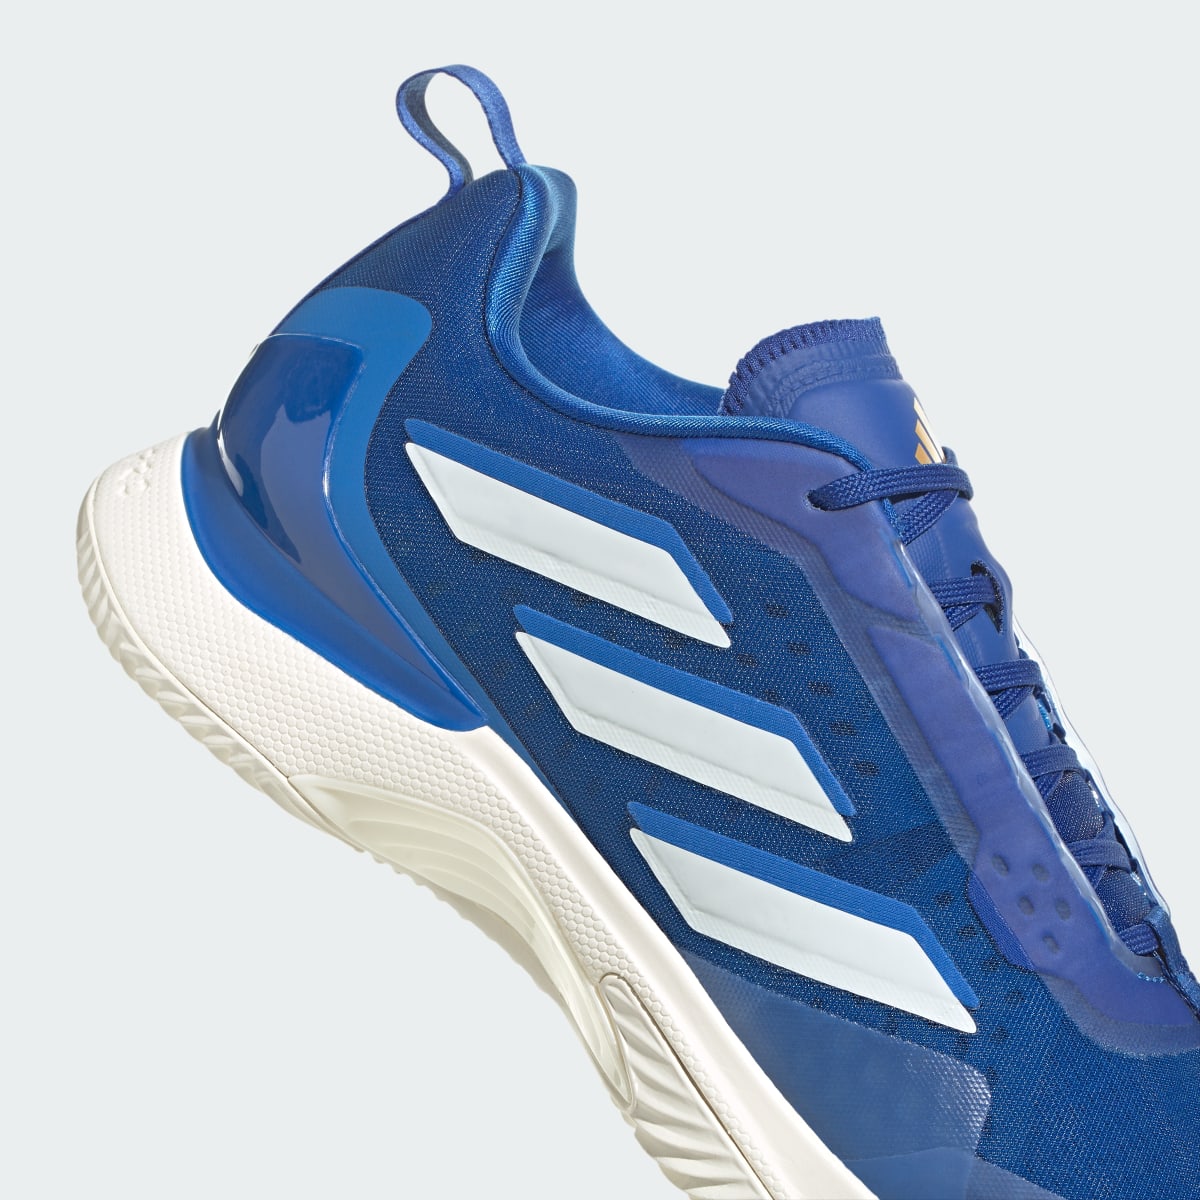 Adidas Avacourt Clay Court Tennis Shoes. 10